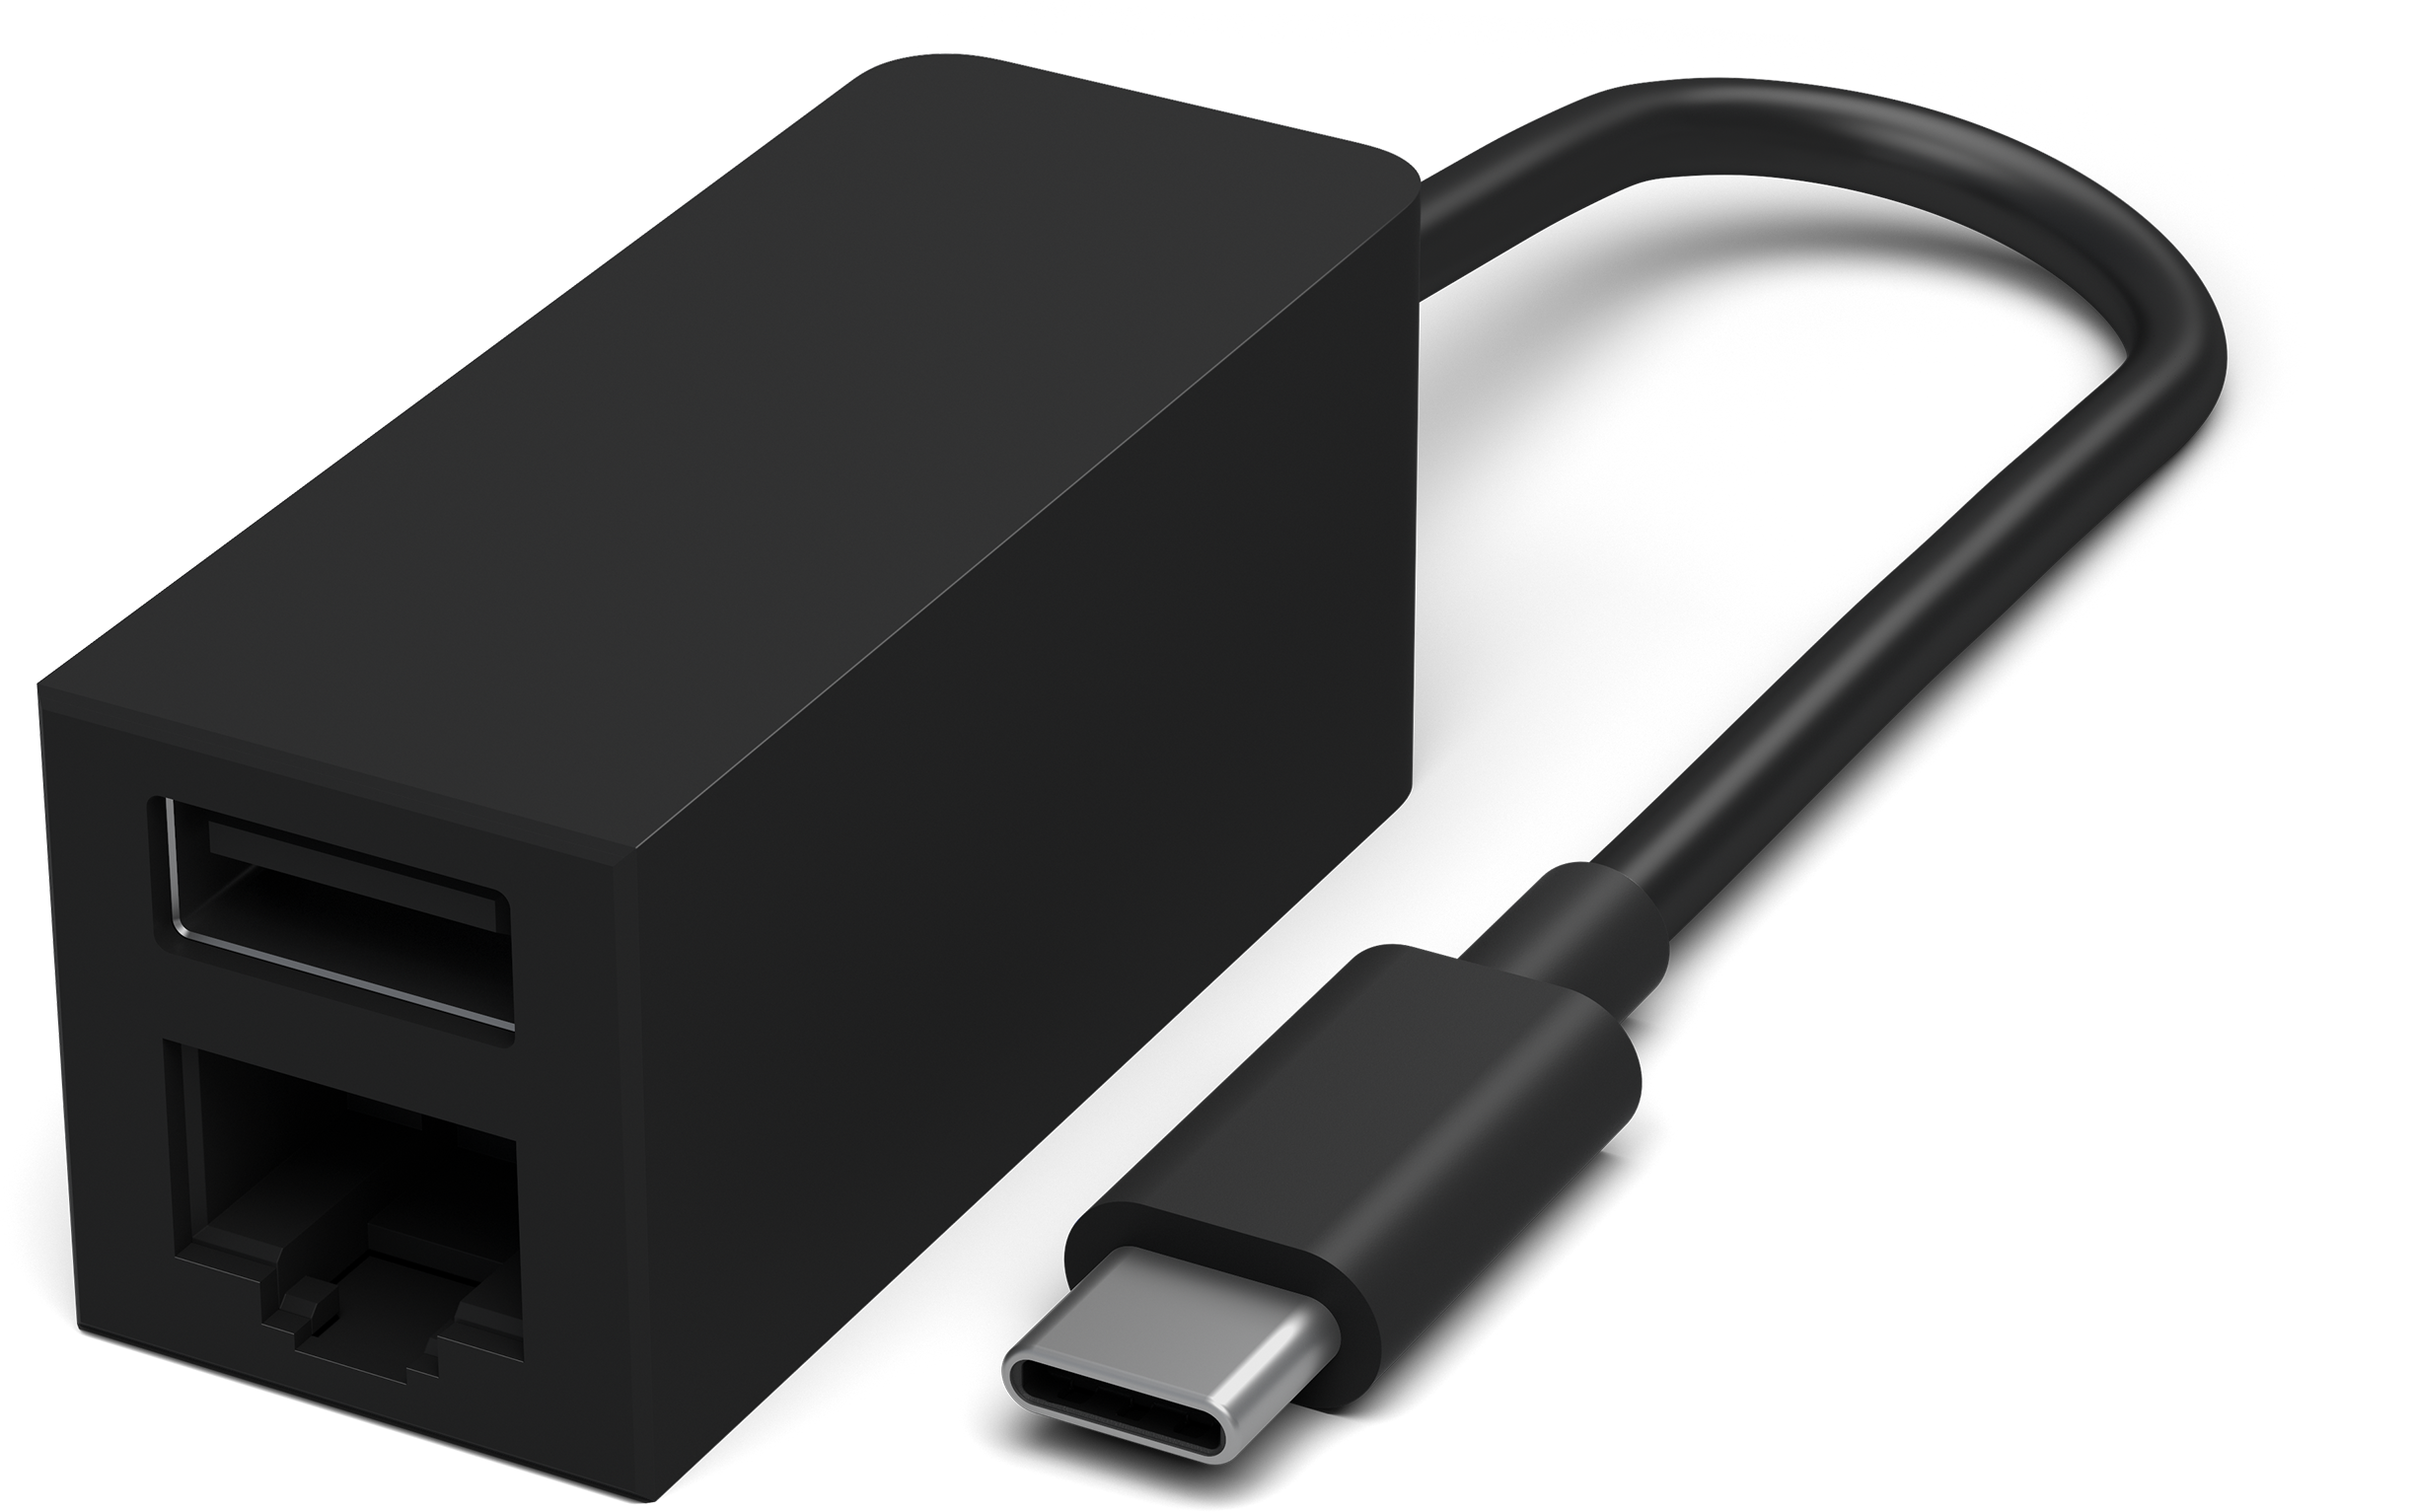 Microsoft Surface to Ethernet and USB Adapter - Store